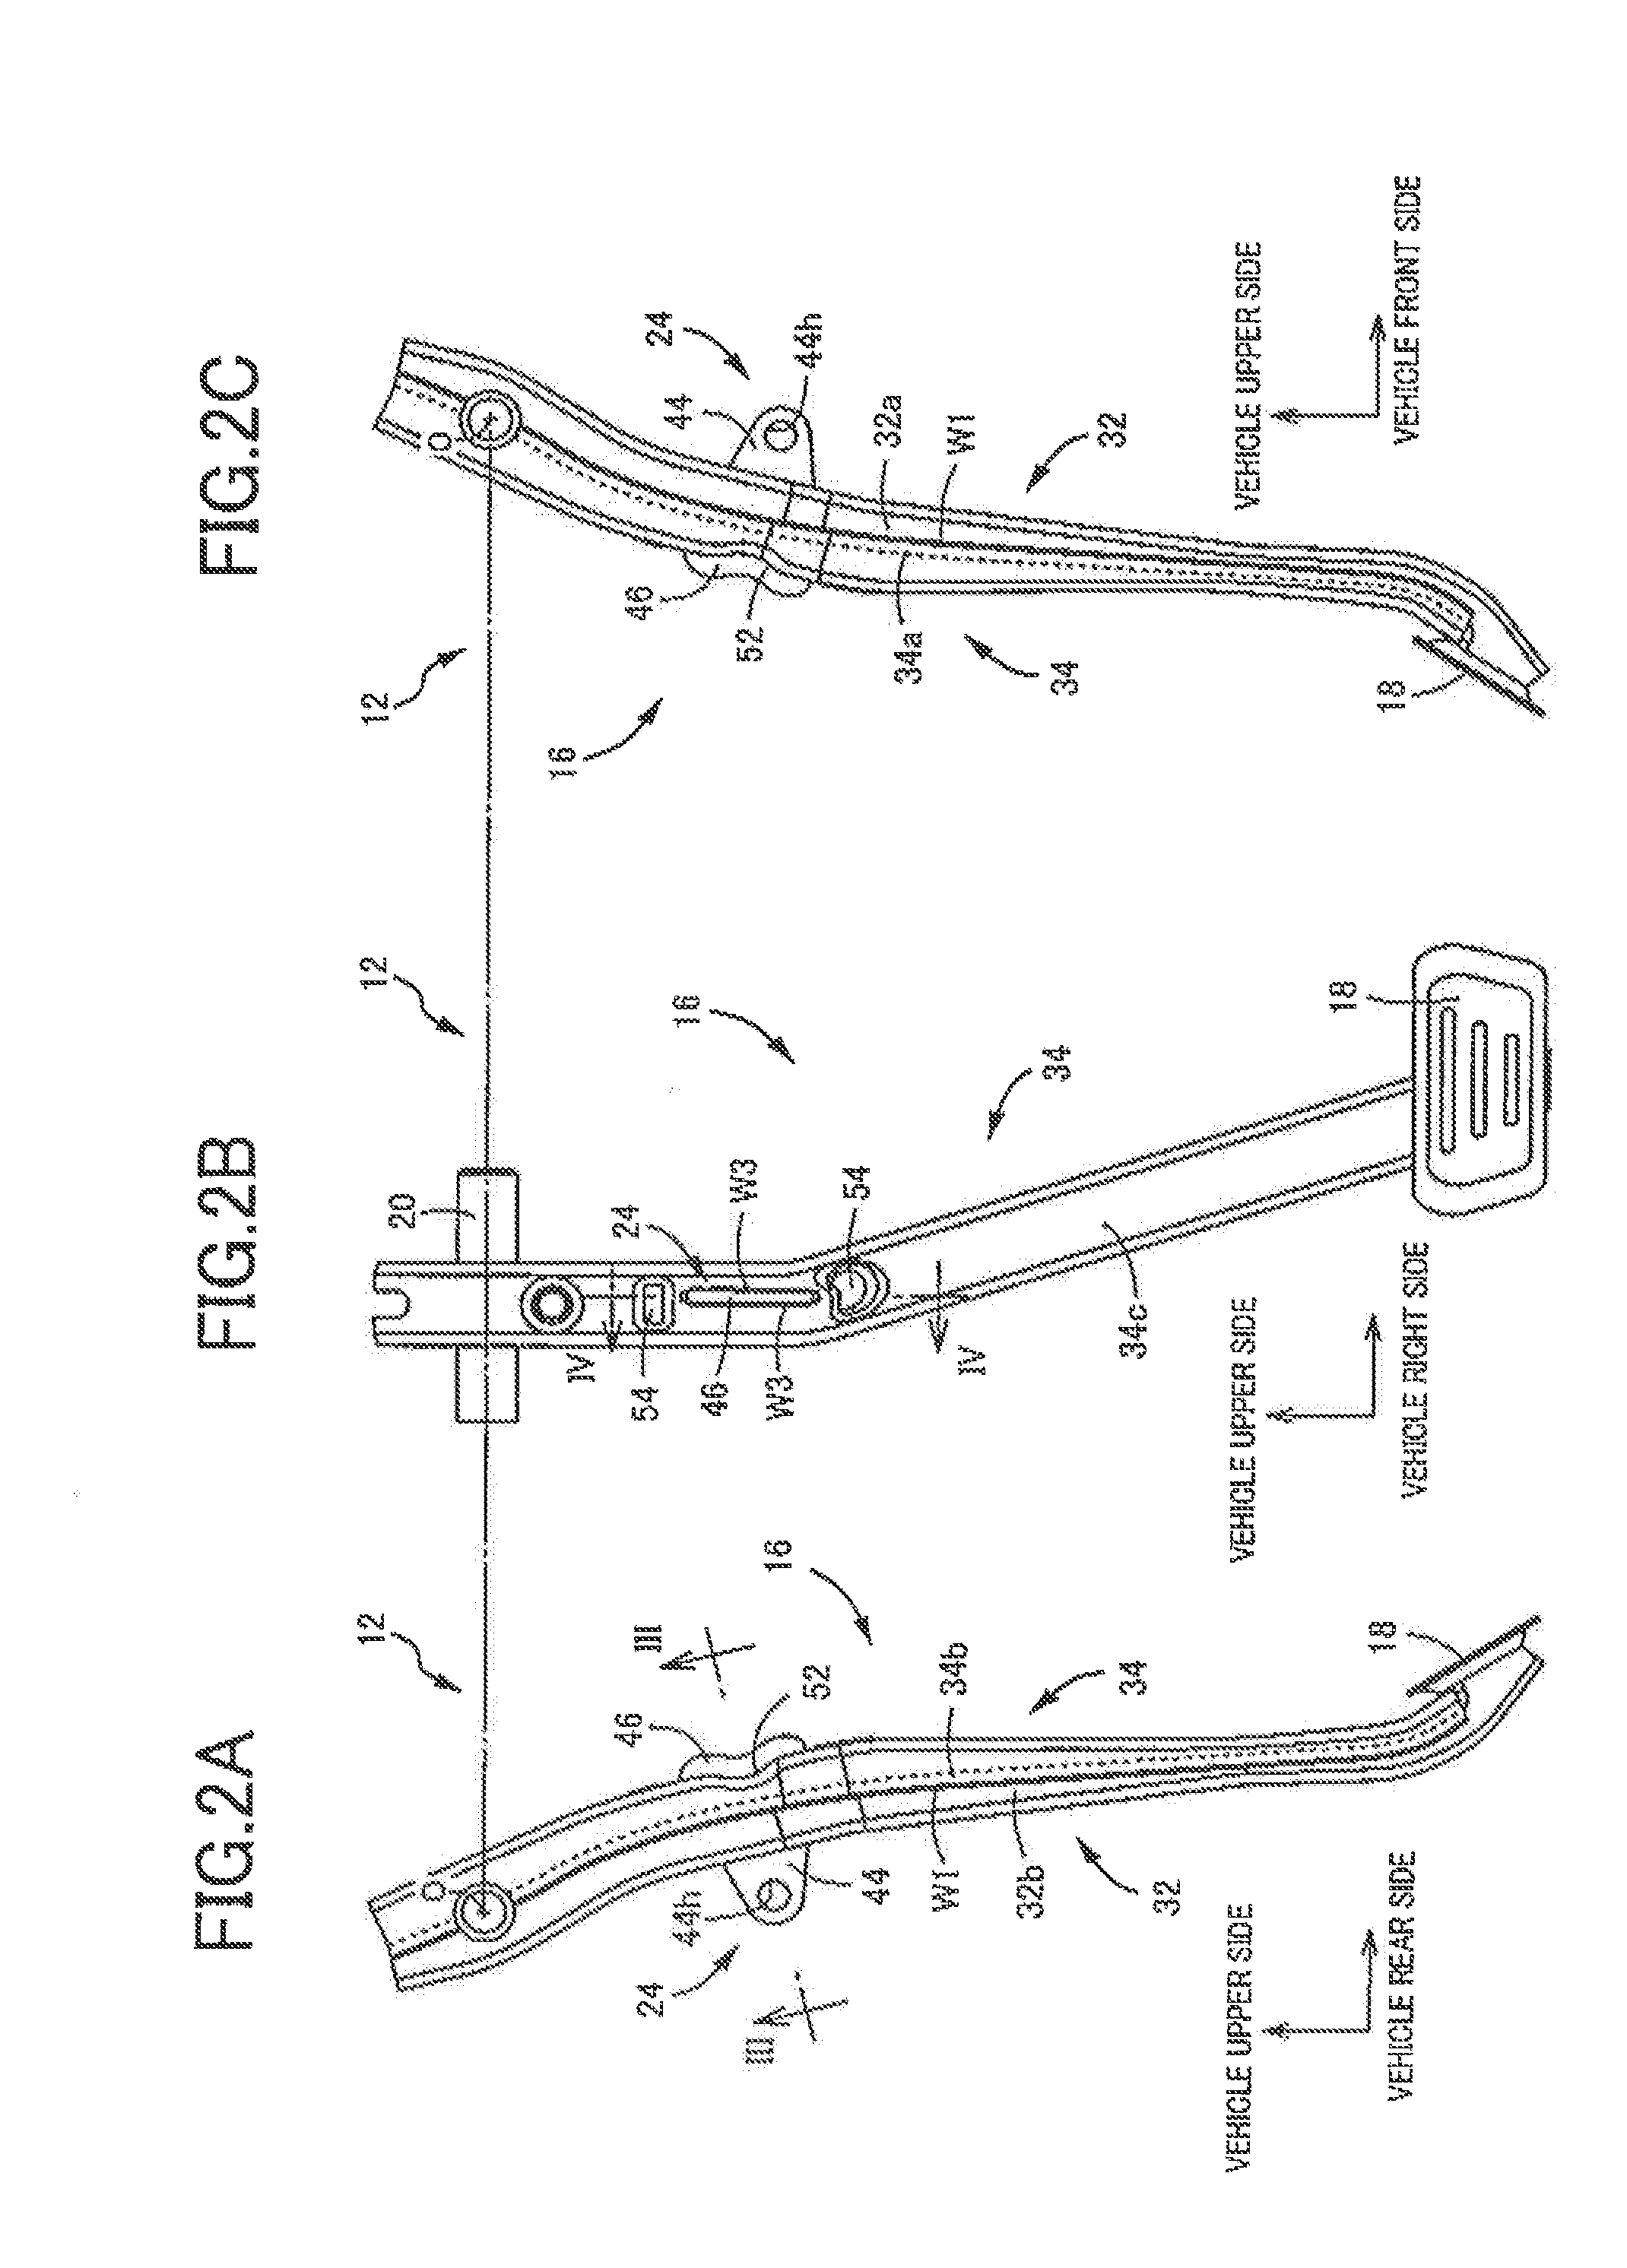 Operating pedal device for vehicle